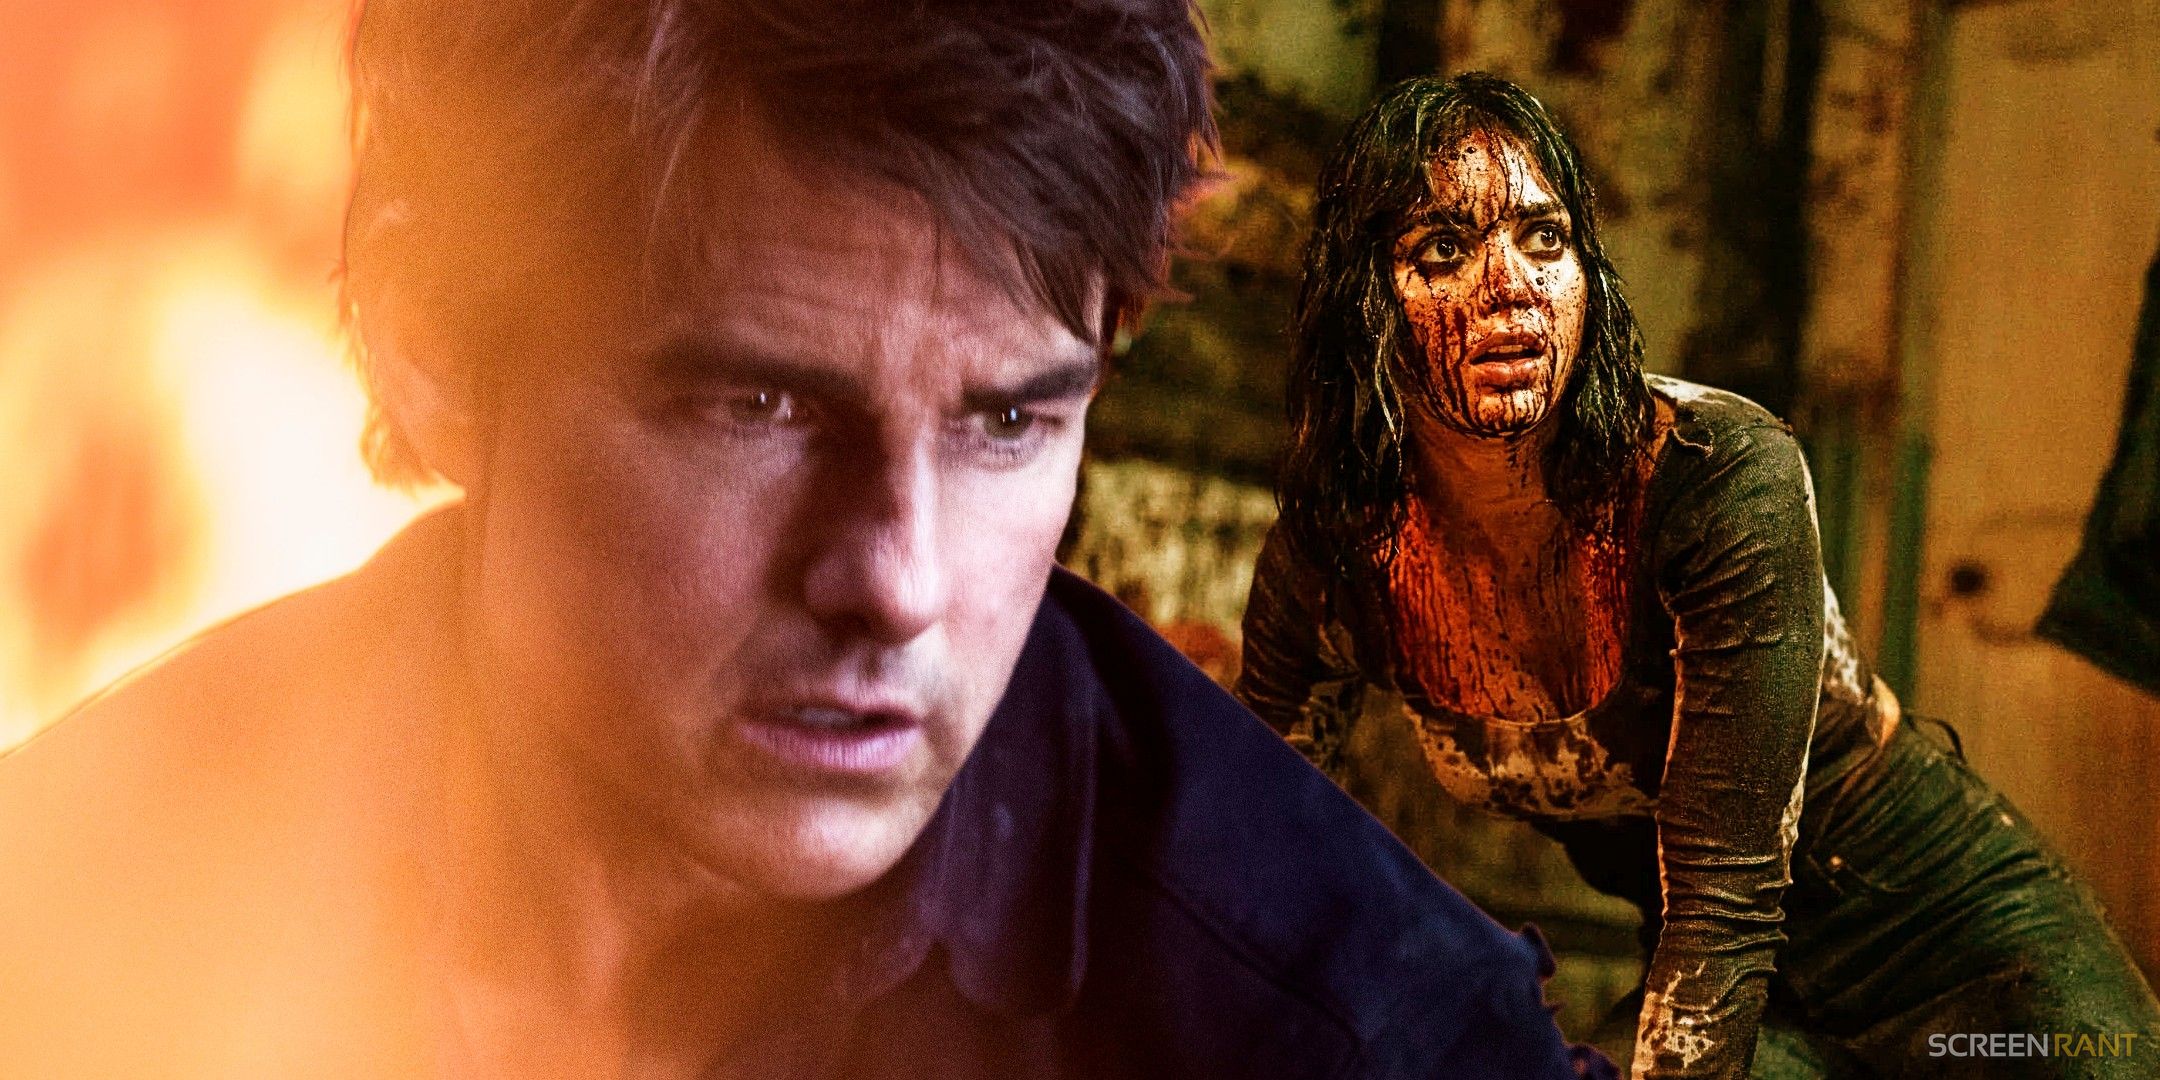 New 83% Horror Movie Is The Perfect Way To Reboot The Dark Universe 7 Years After Tom Cruise's Failure